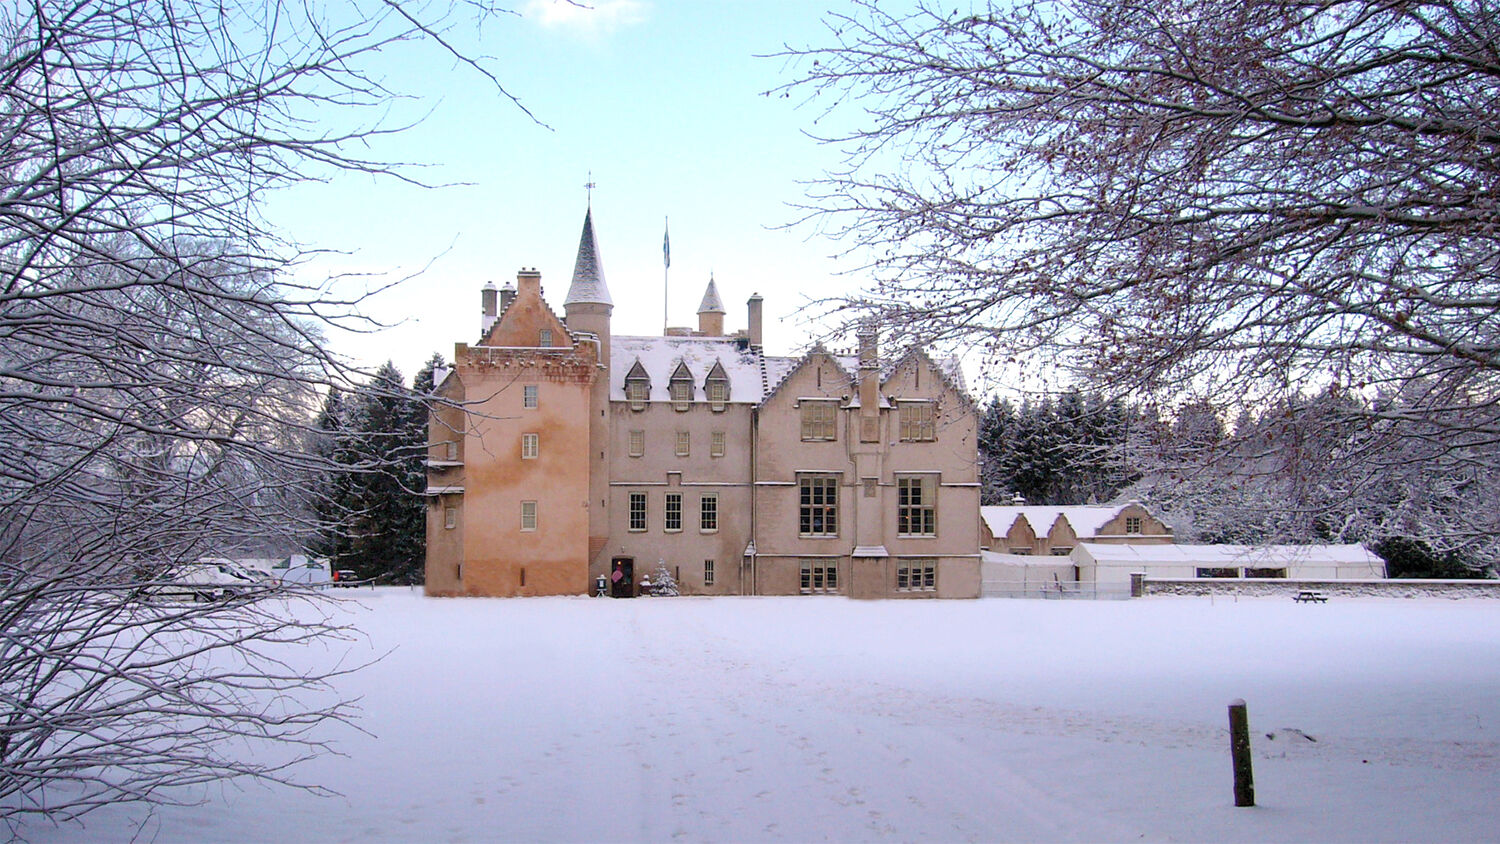 A view of Brodie Castle after heavy snowfall. The lawns and trees are blanketed with snow. The sky is a pale blue.